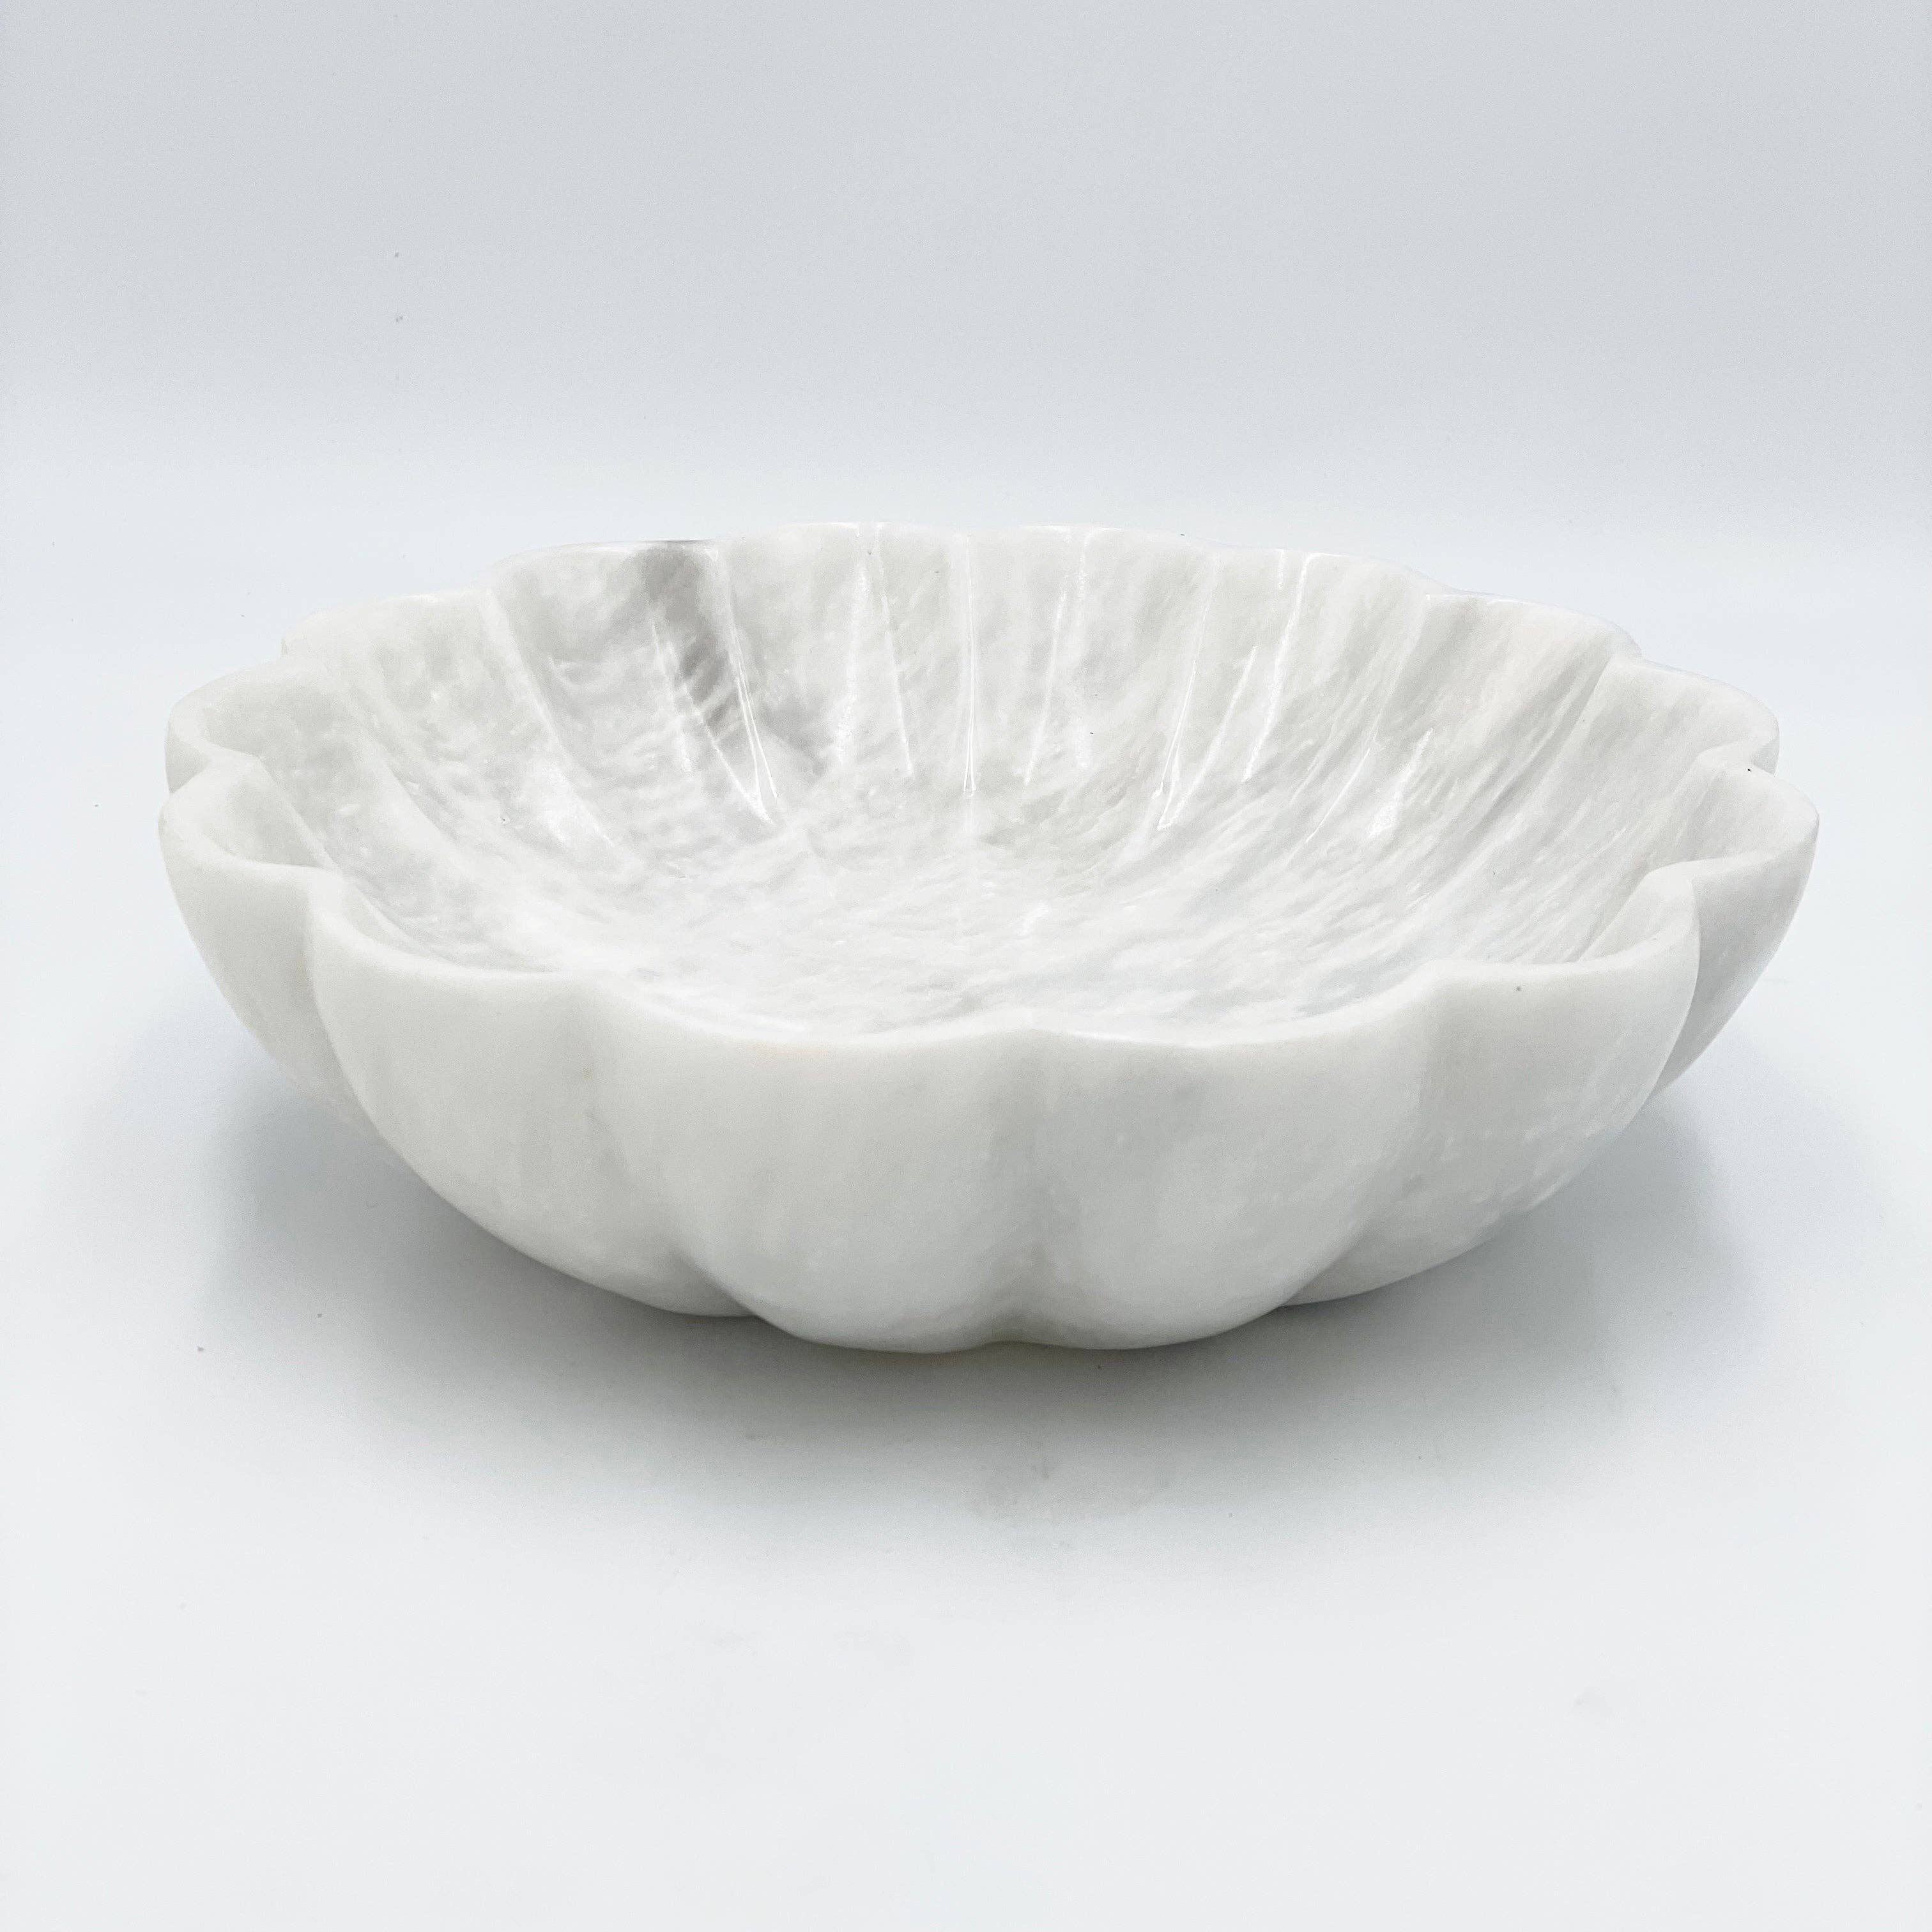 Hand-carved Bowl in Marble and Onyx: Verona Marble